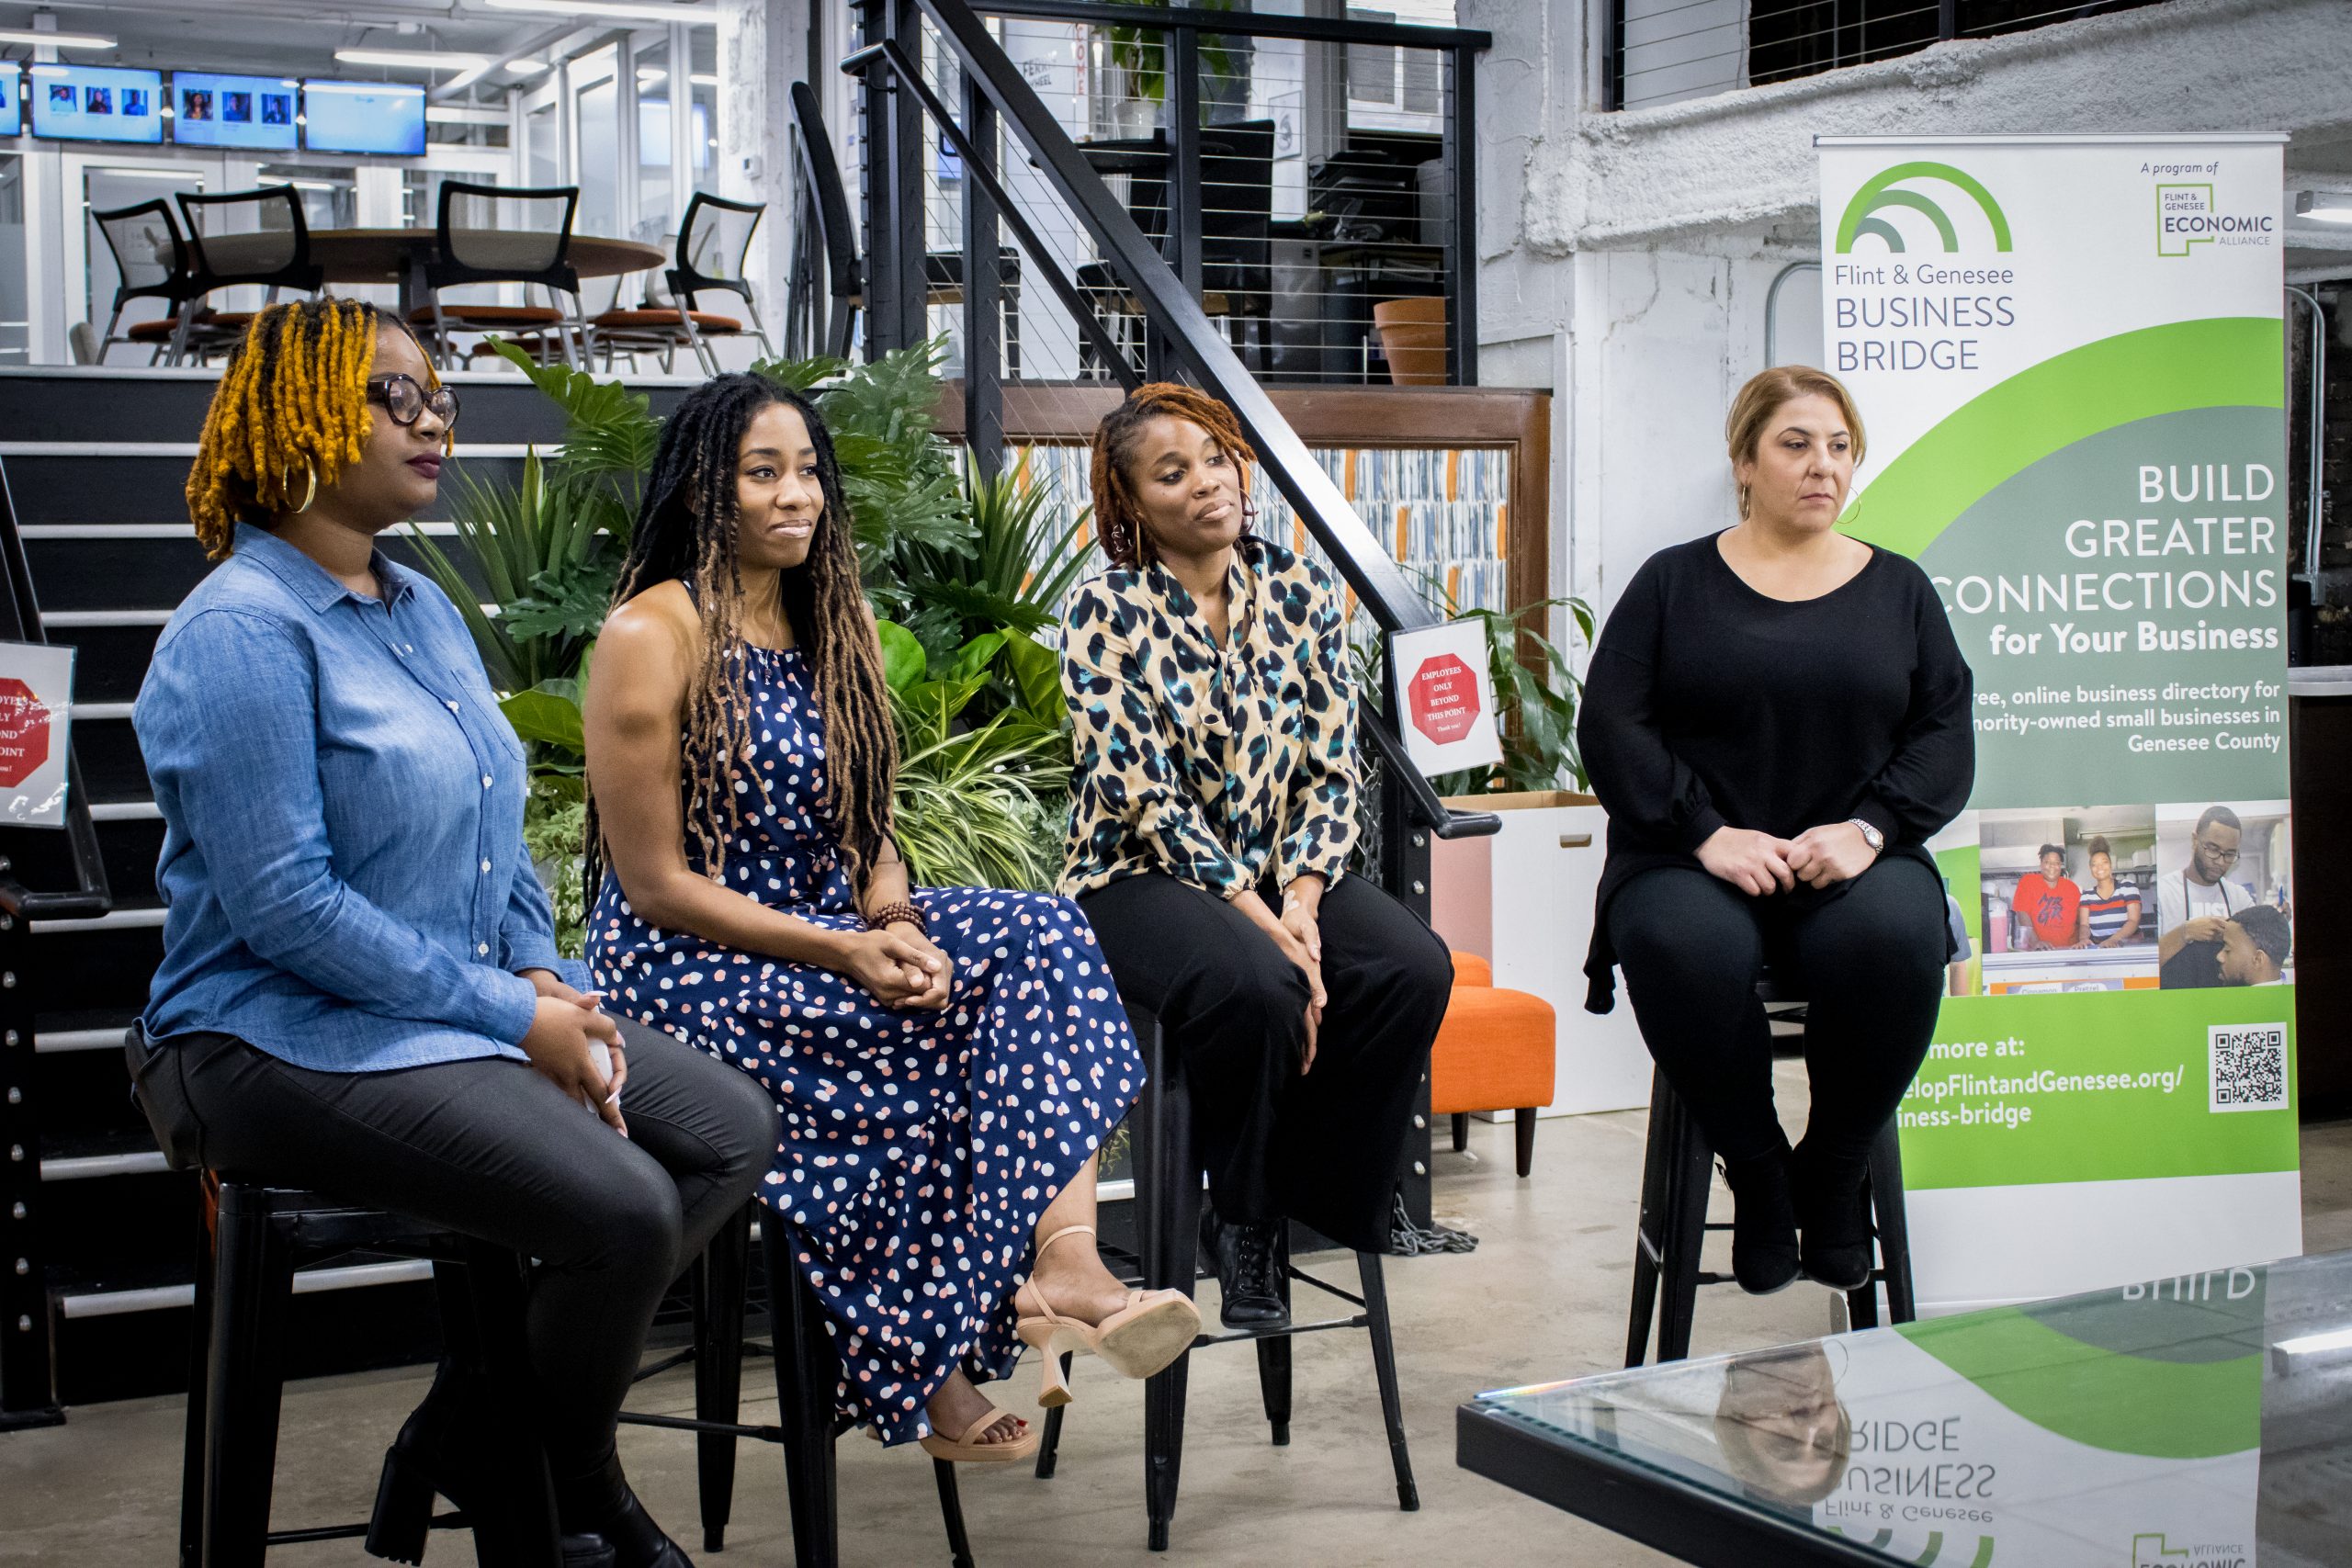 Grow & Gather events used as a way to info minority-owned small business owners about the benefits of adding their business to the Flint & Genesee Business Bridge. Events were organized by Ebonie Gibson and hosted at Drinks of Essence Bartending School and Ferris Wheel/100K Ideas.